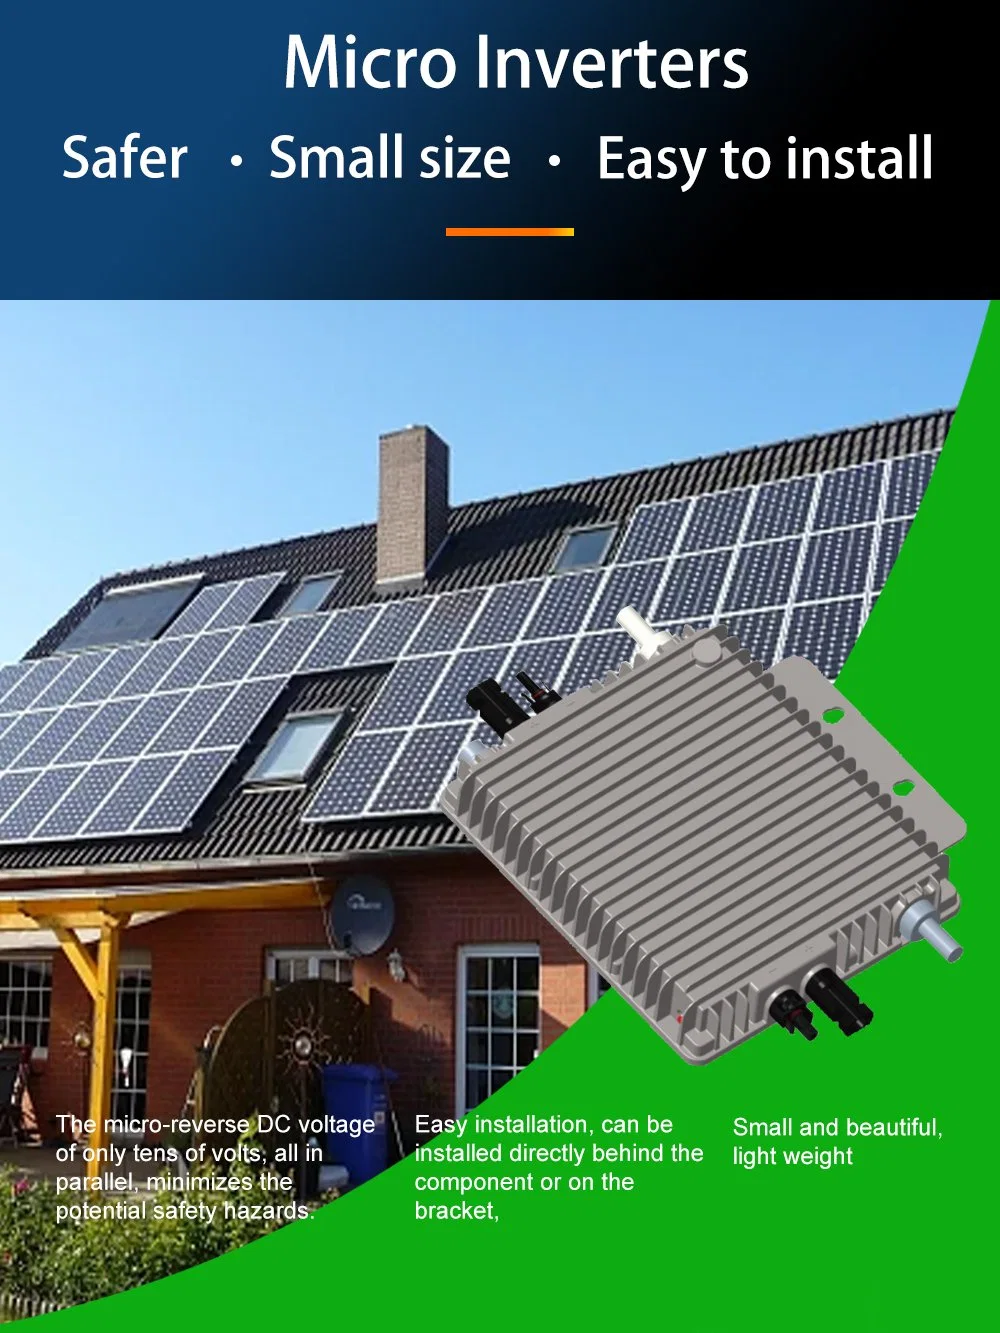 U-Greenelec 5kw 10kw 15kw 20kw 30kw Hybrid on/off Grid Solar PV Inverter Panels Photovoltaic Home Energy Storage Module System Kit with Lithium-Ion Battery